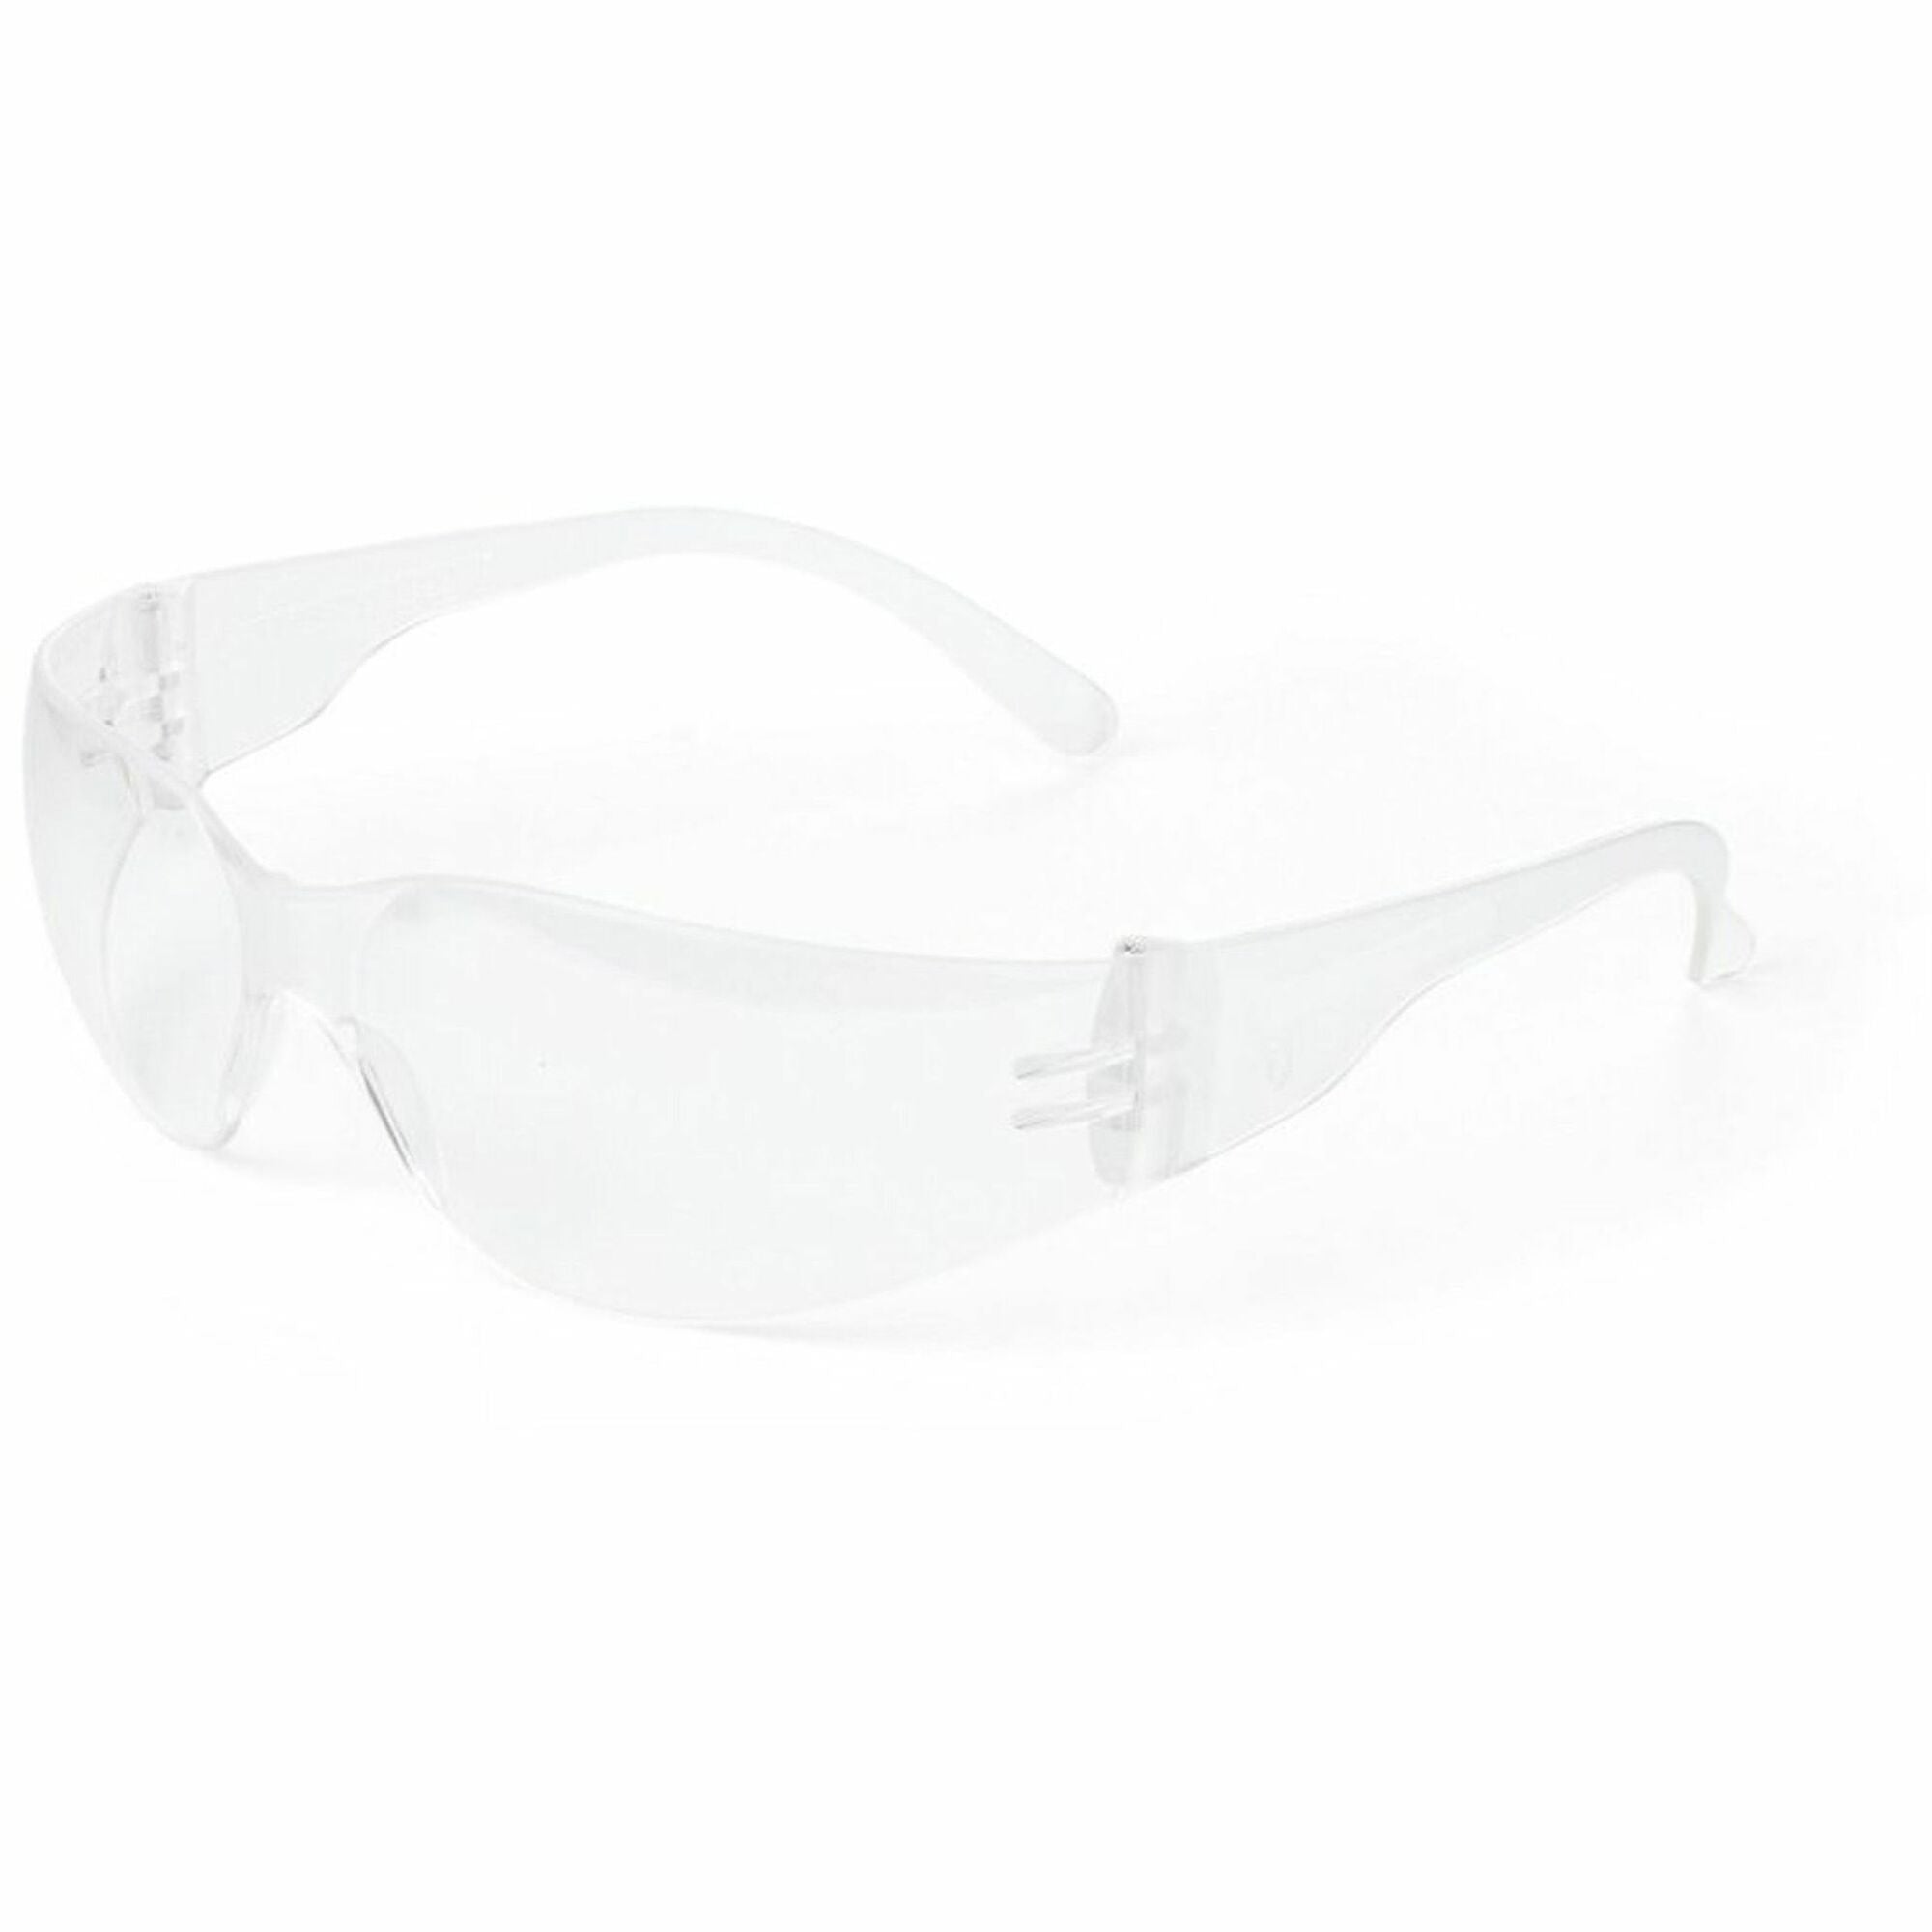 medline-clear-frame-lens-safety-glasses-recommended-for-eye-one-size-size-ultraviolet-impact-protection-latex-free-comfortable-secure-fit-uv-resistant-1-each_miinon24770 - 1